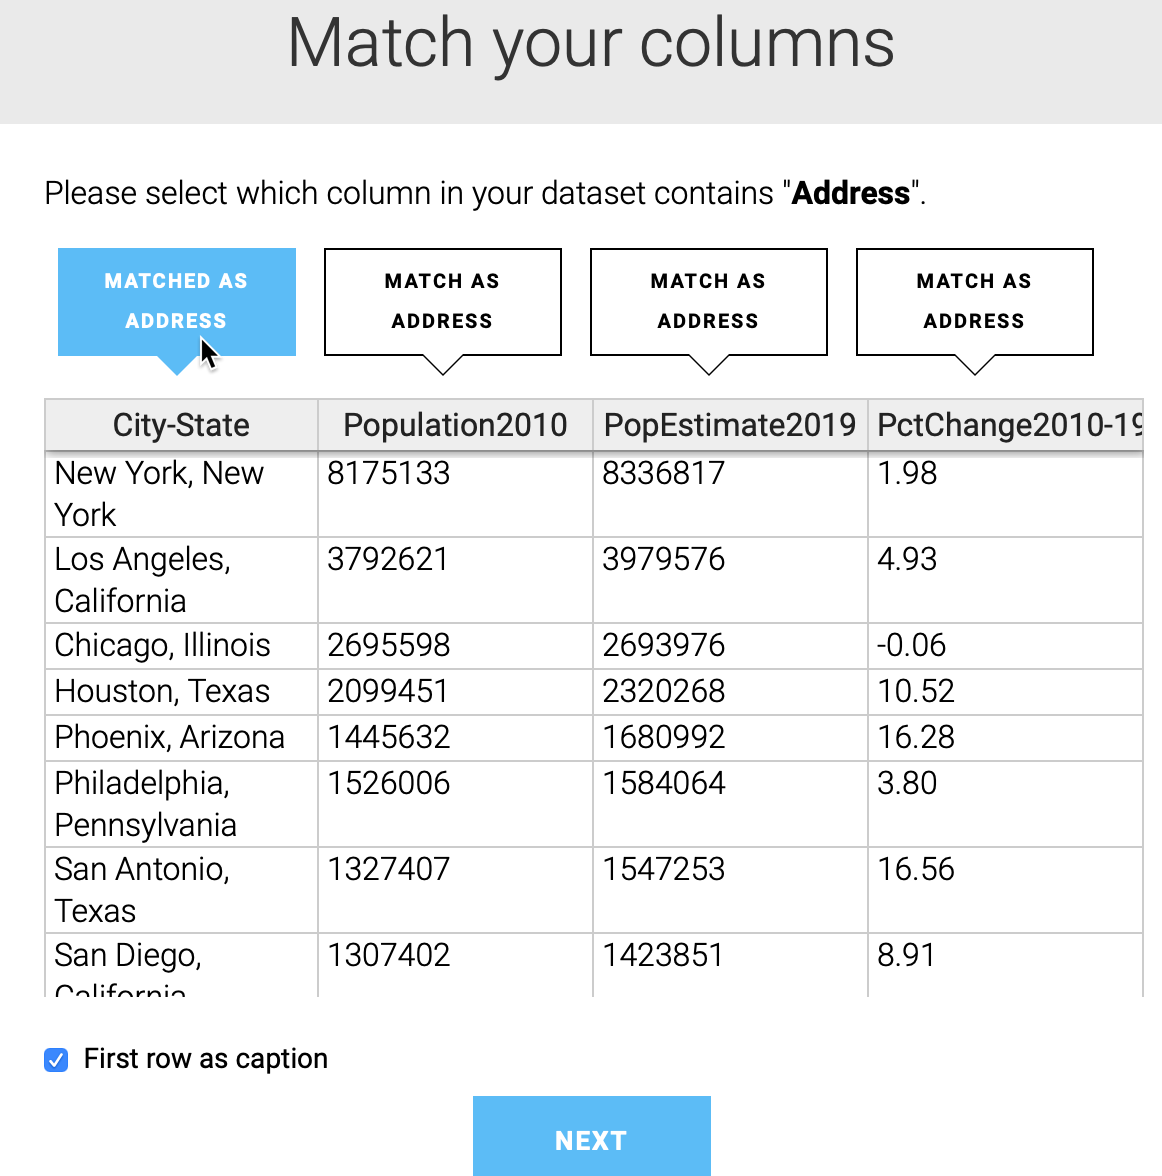 Select the City-State column to be matched as the Address.